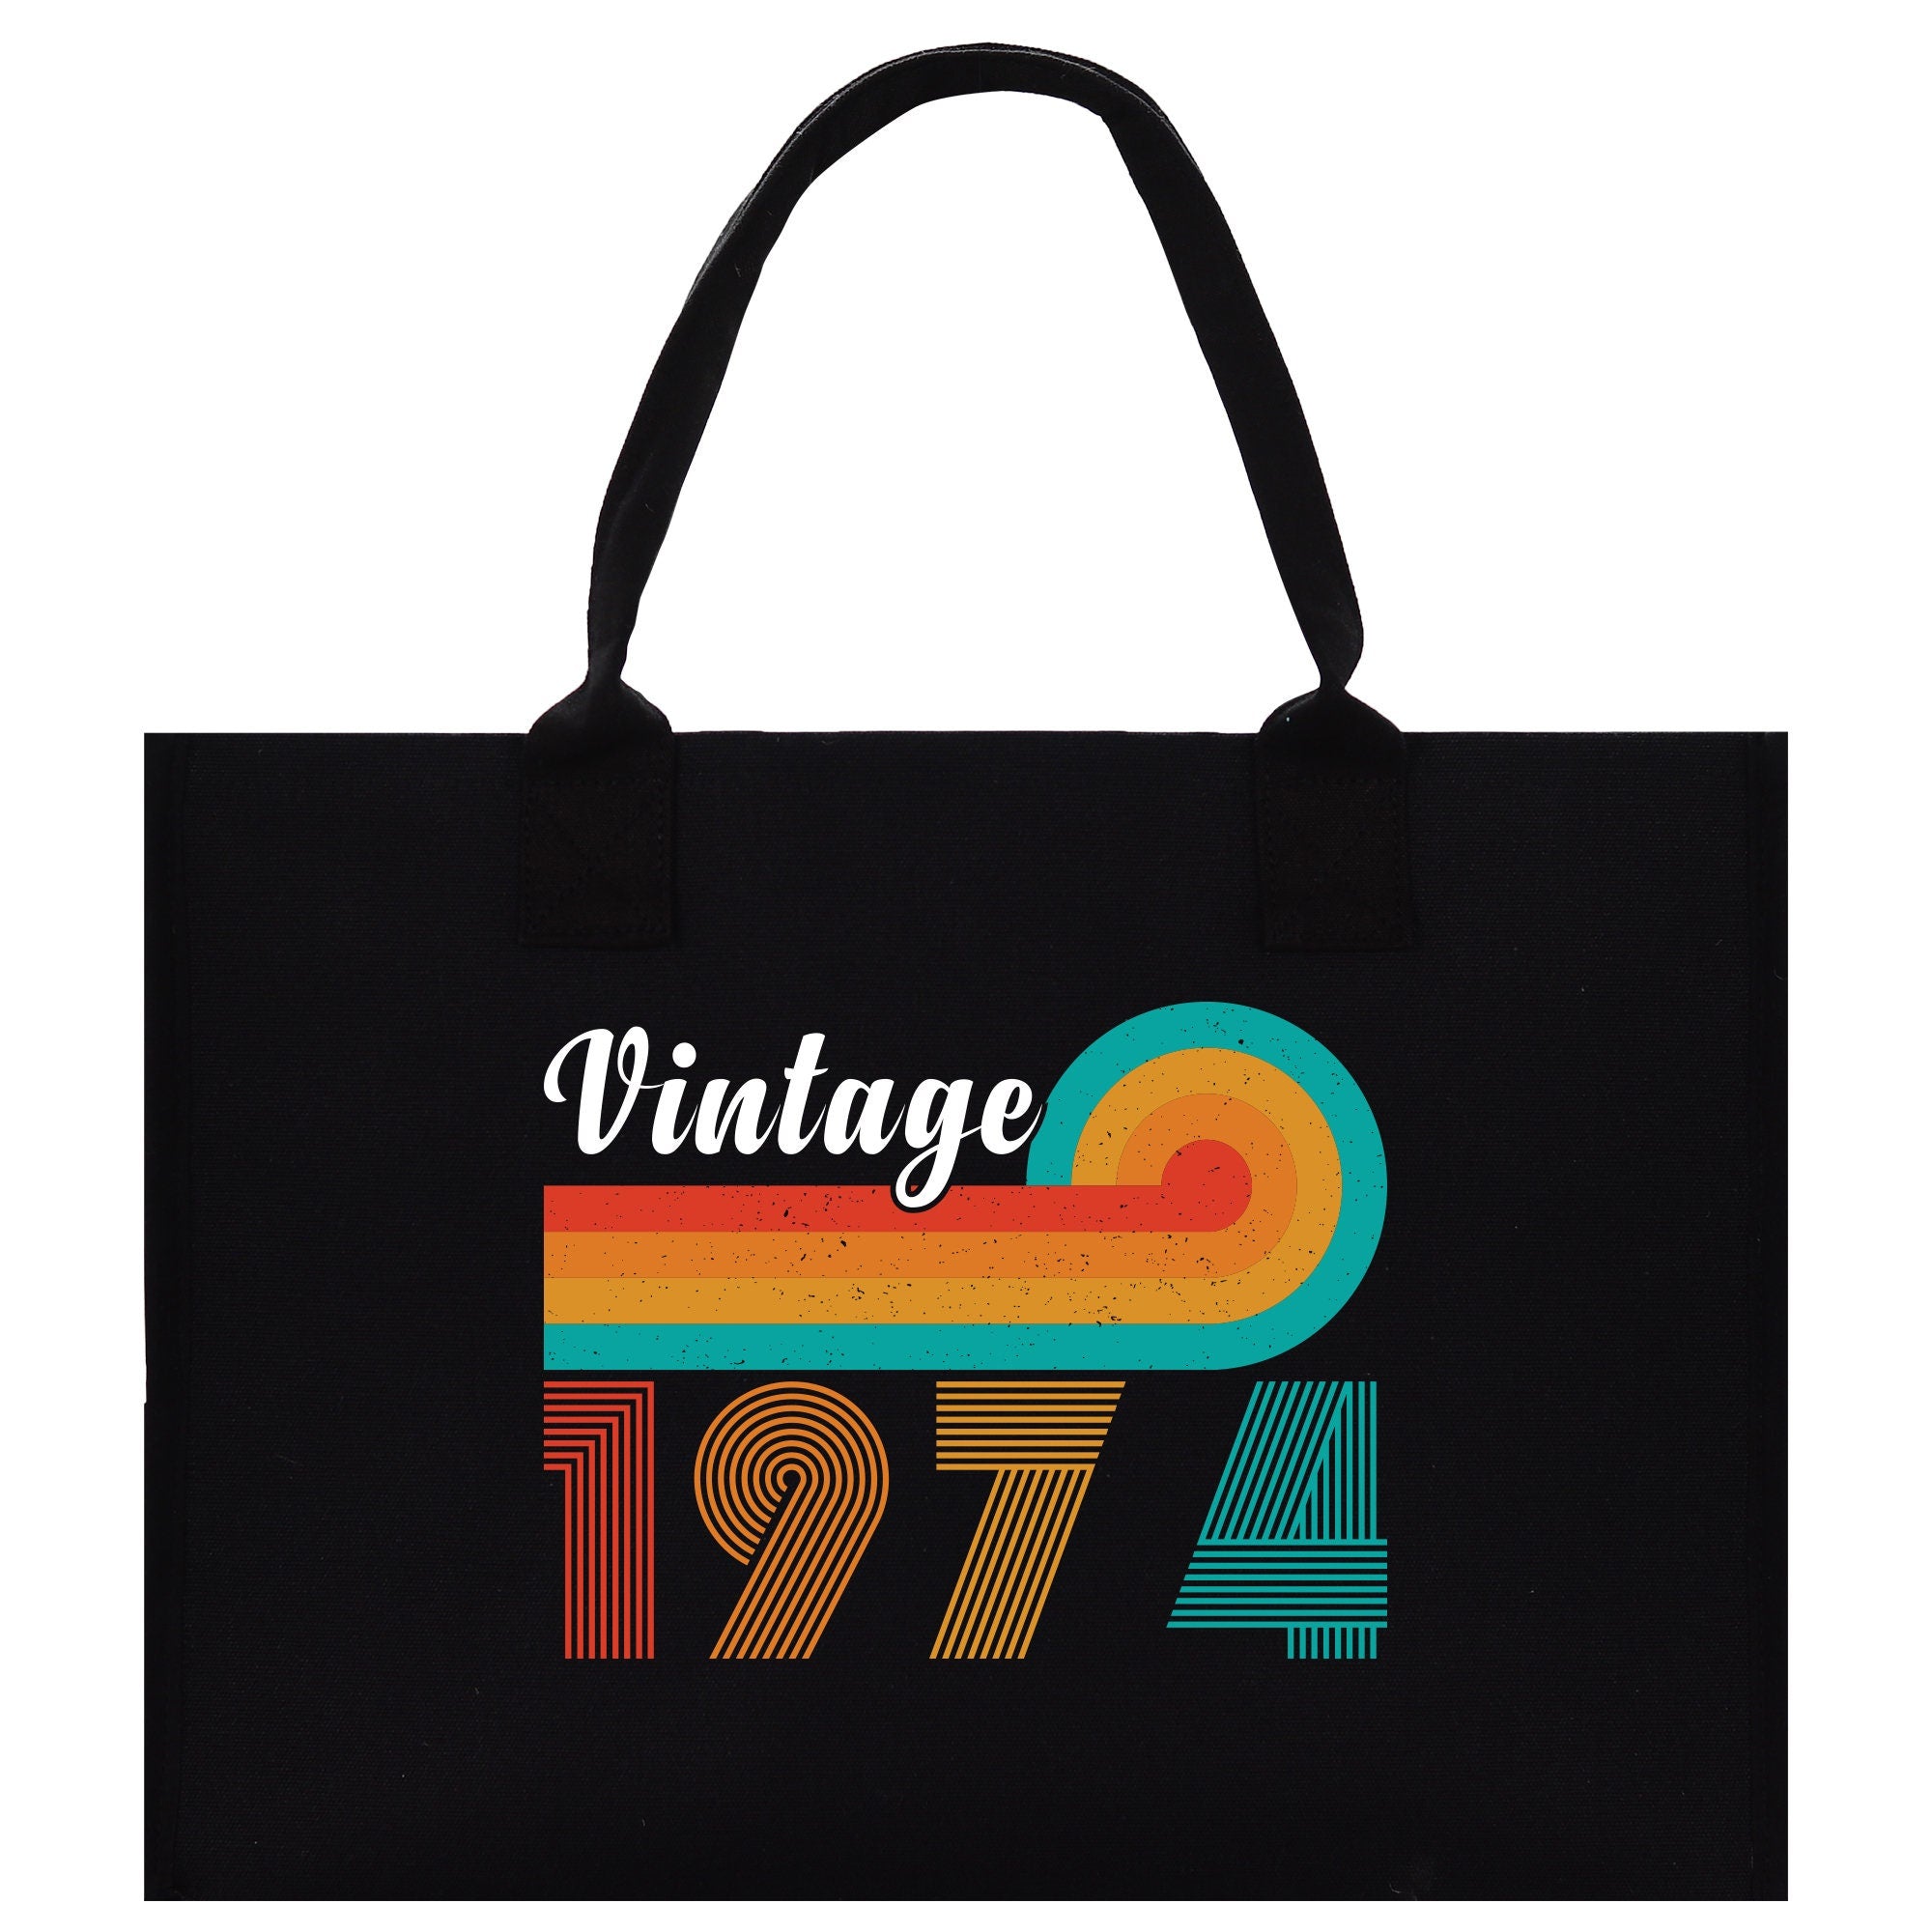 a black tote bag with the words vintage 1971 printed on it